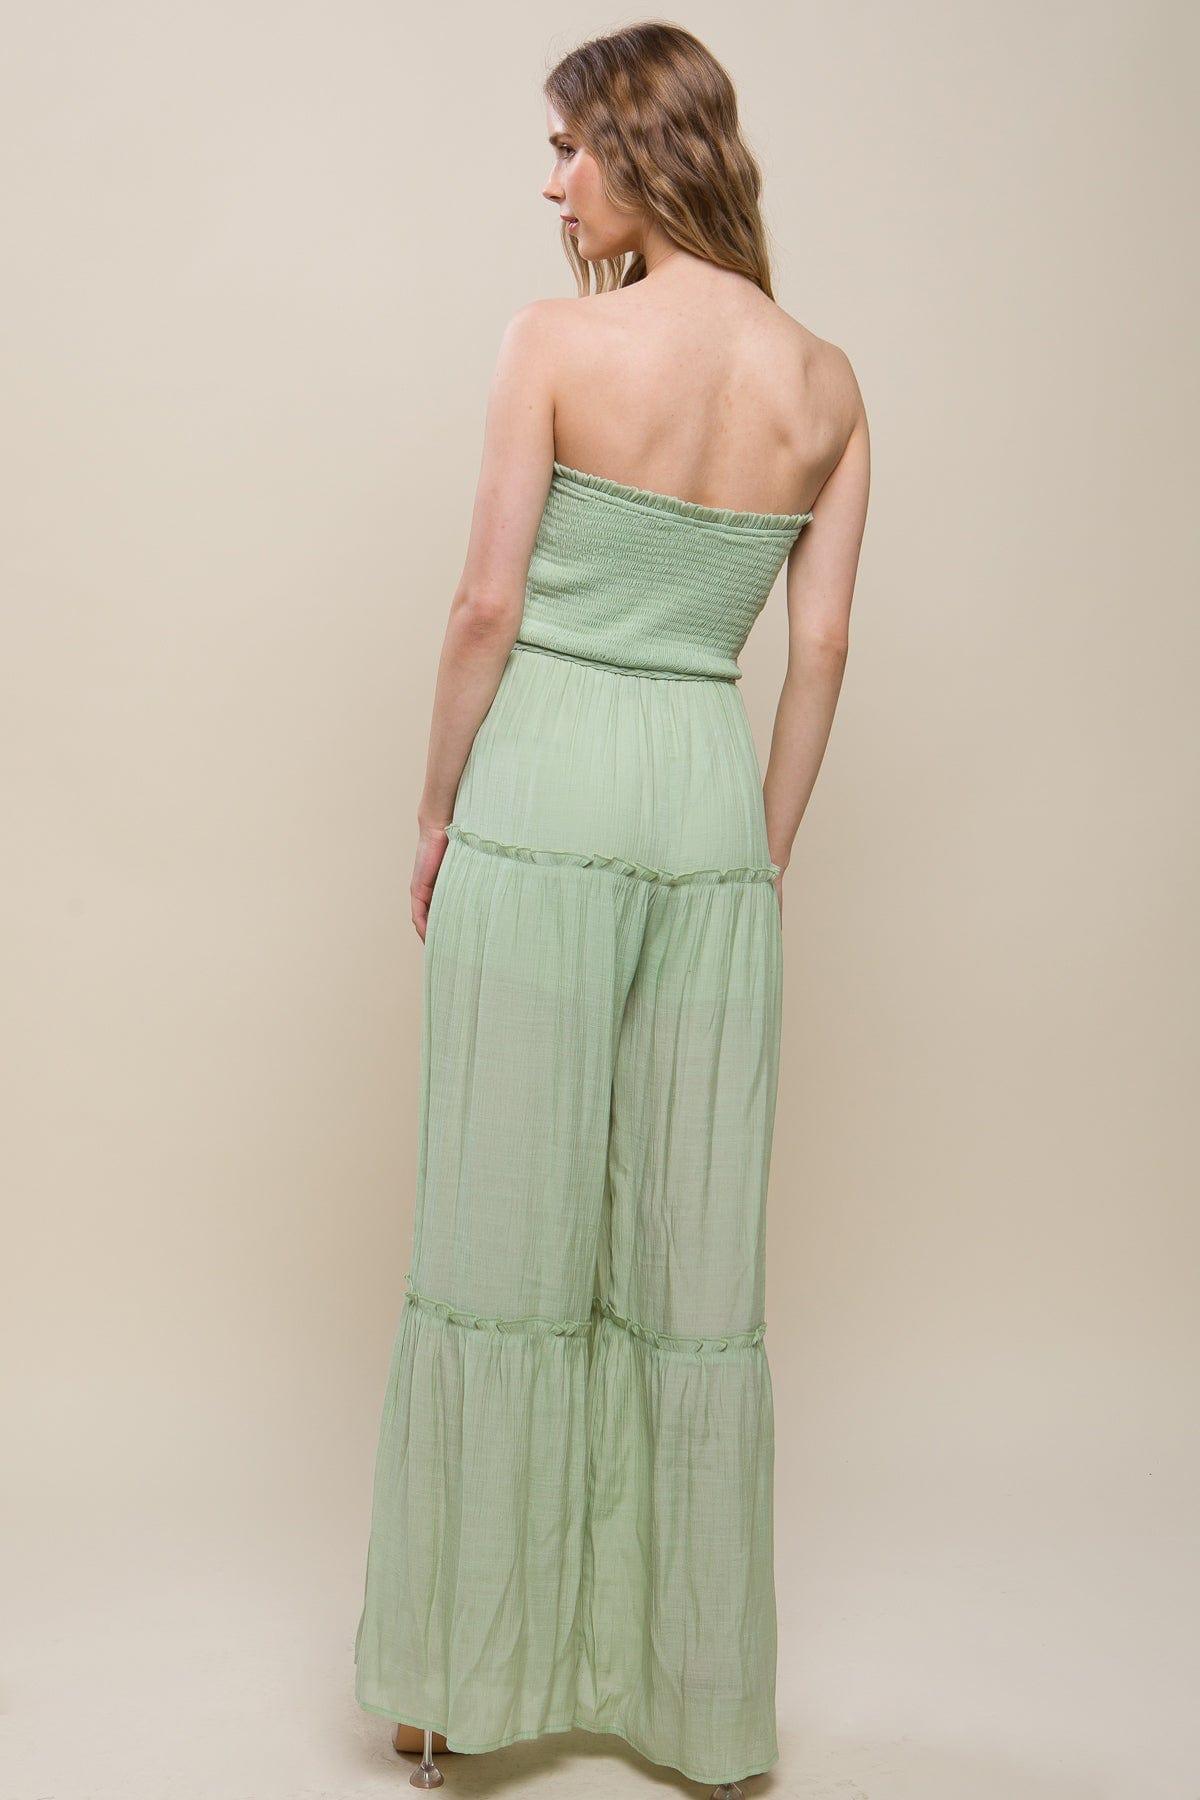 SAVLUXE Jumpsuits & Rompers Celery Woven Solid Sleeveless Smocked Ruffle Jumpsuit